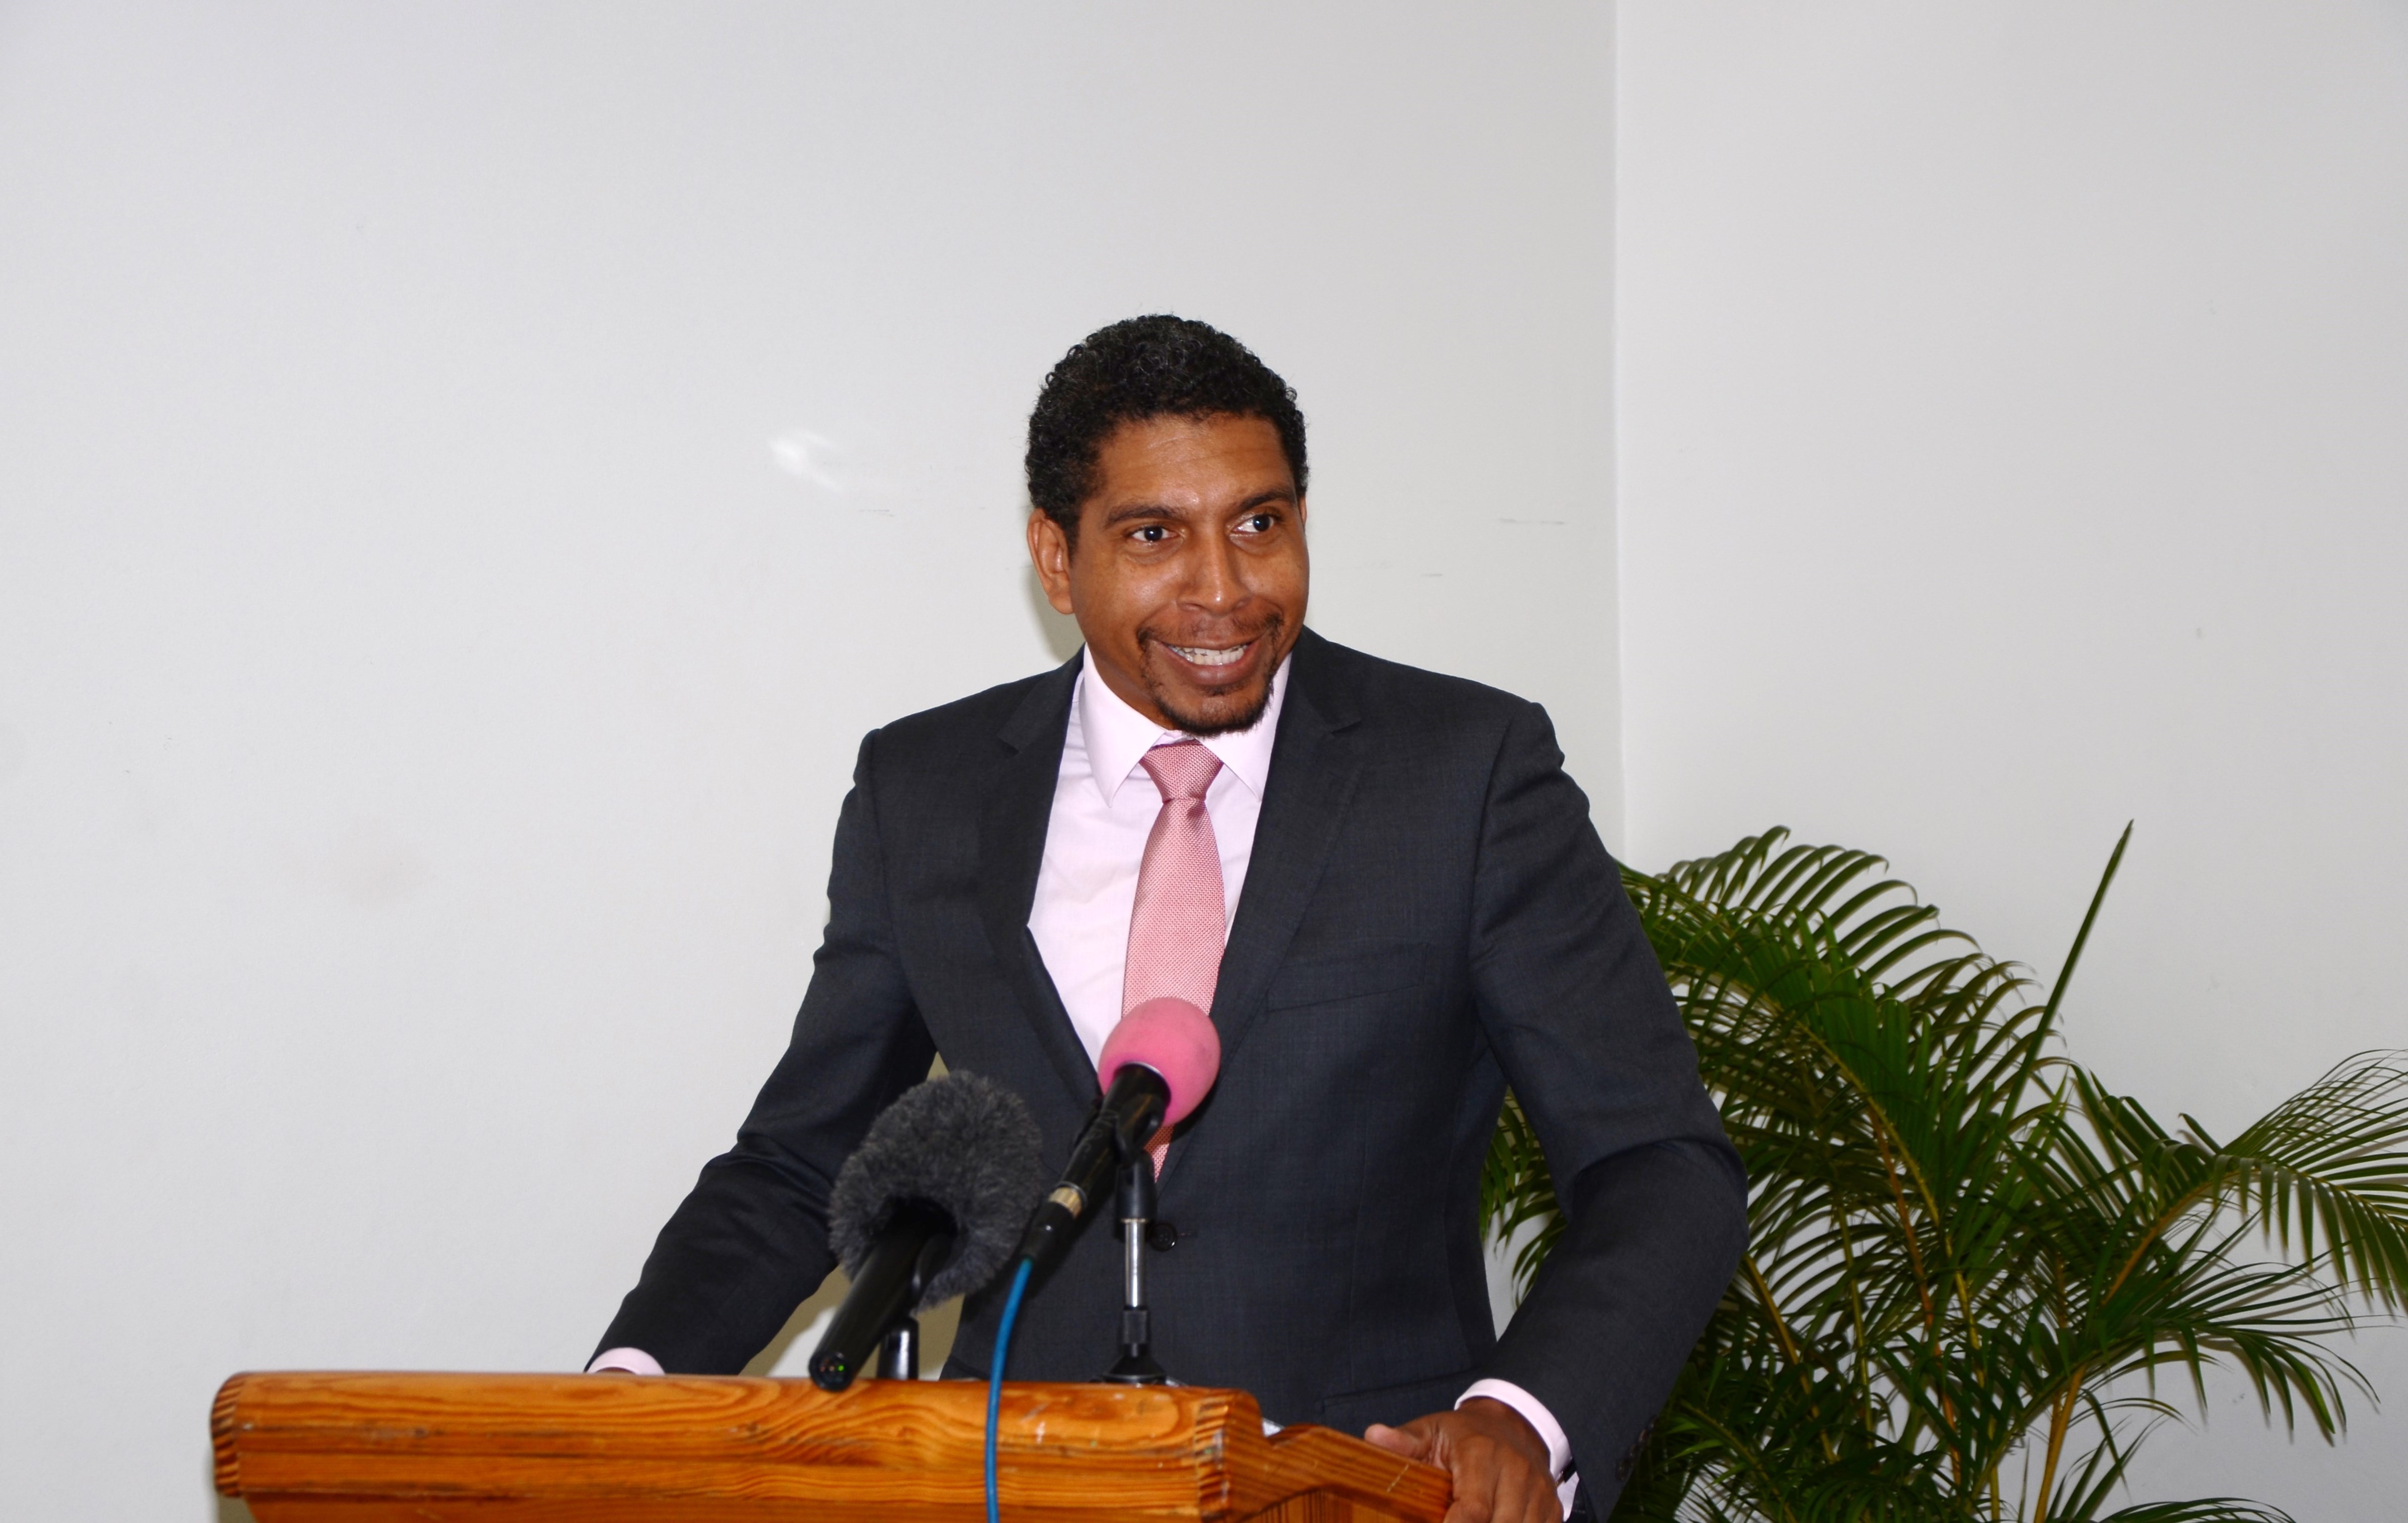 Hon. Camillo Gonsalves, Minister of Foreign Affairs, Foreign Trade, Commerce and Information Technology, addresses opening of Inter-American Exhibit 2014(April 14, 2014)